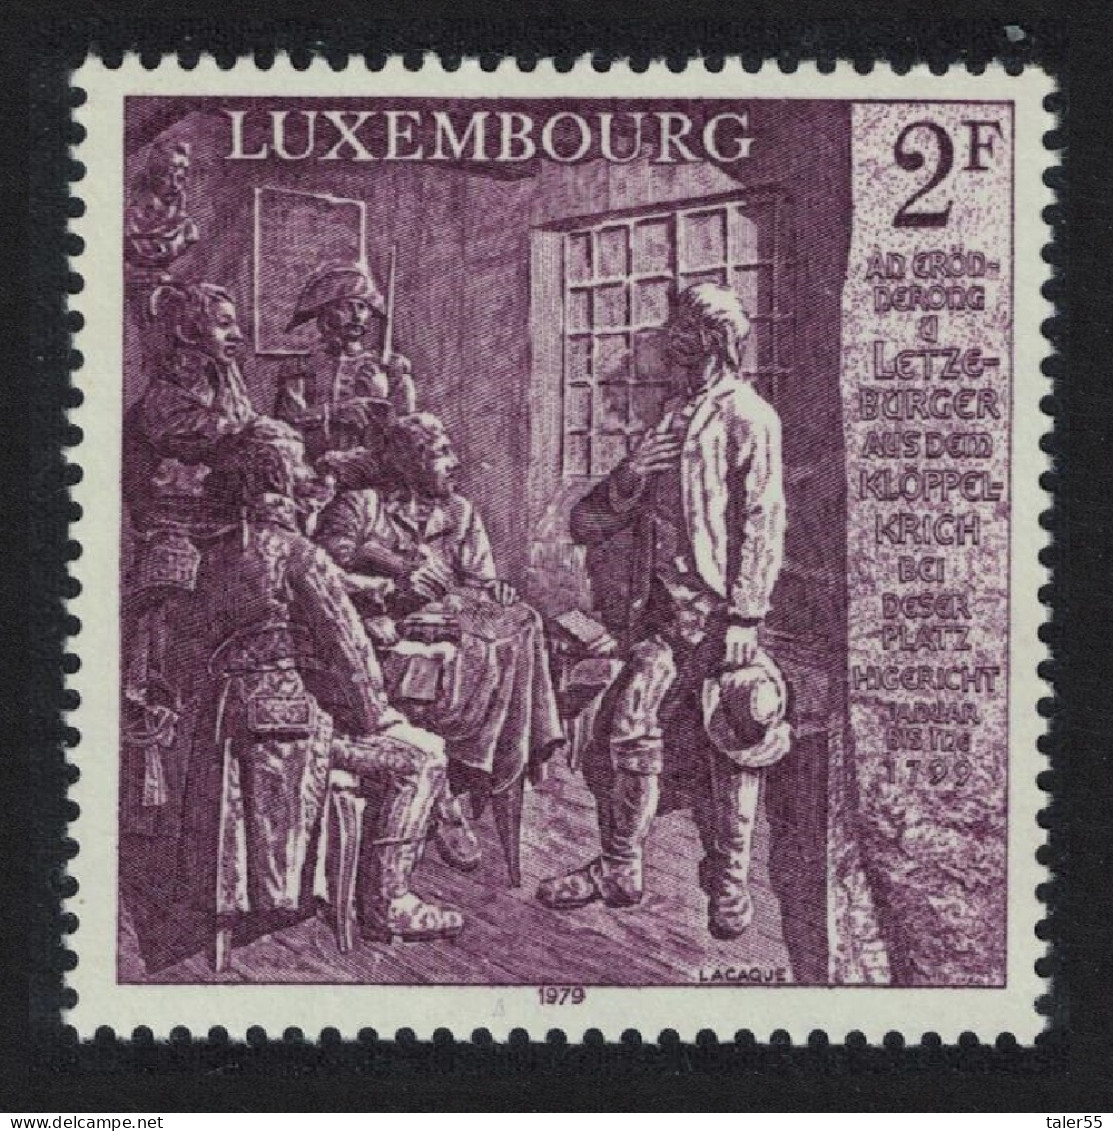 Luxembourg Peasant Uprising Against French 1979 MNH SG#1026 MI#989 - Unused Stamps